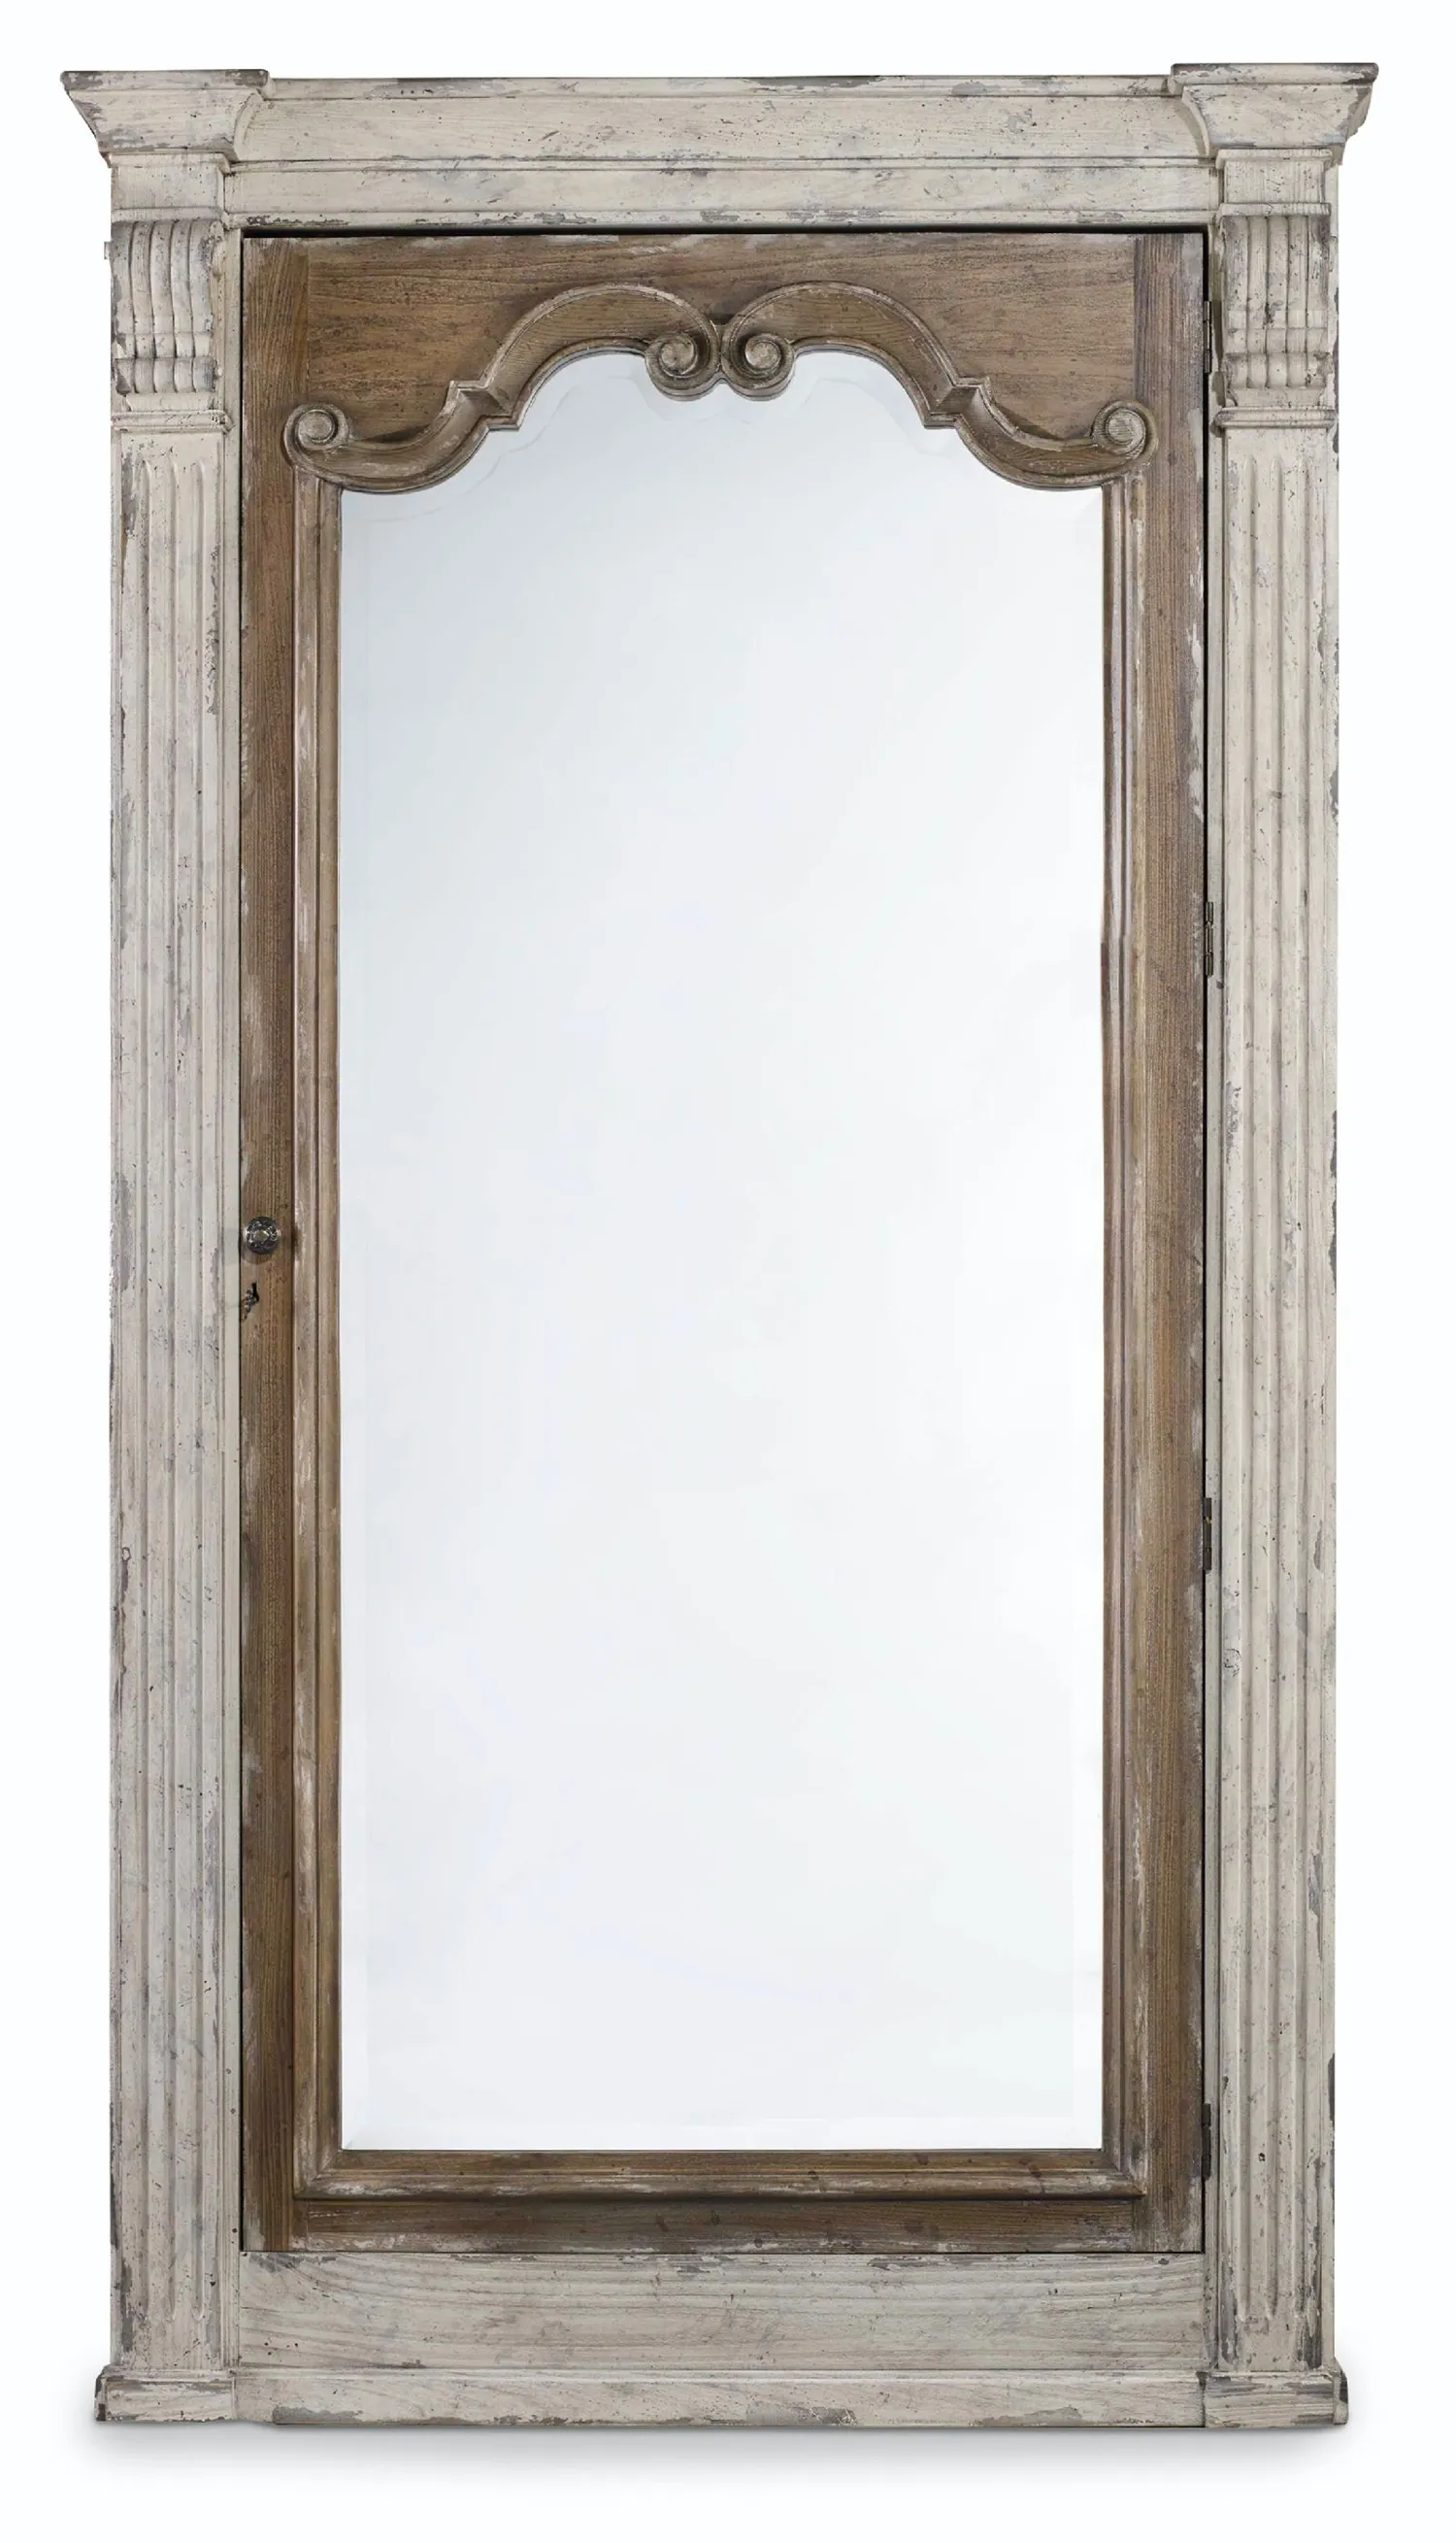 CHATELET FLOOR MIRROR WITH JEWELRY ARMOIRE STORAGE